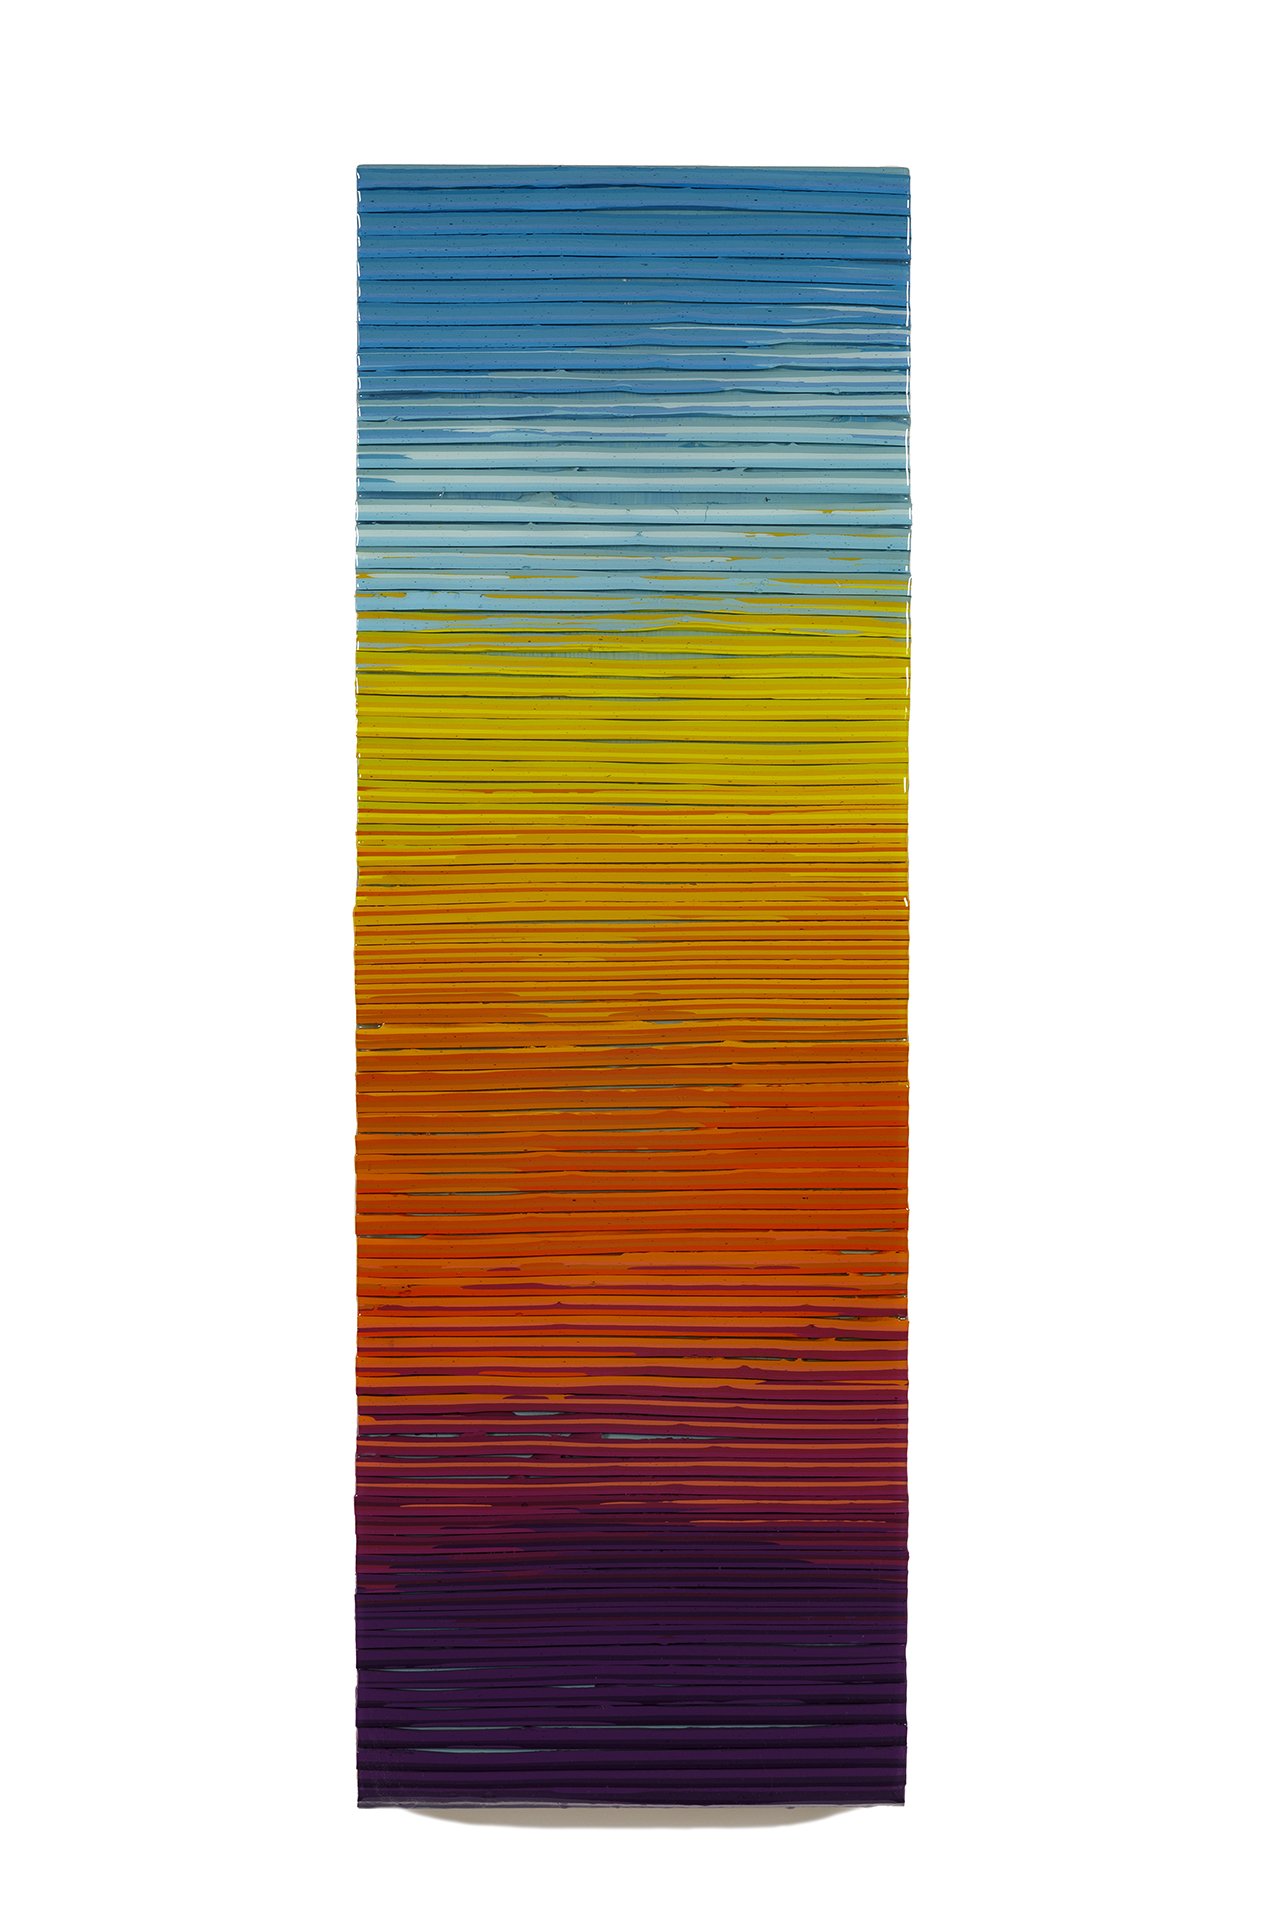  A City Can Never Love You Back  2023  Latex paint and resin on wood panel  36x12x2.5 inches 